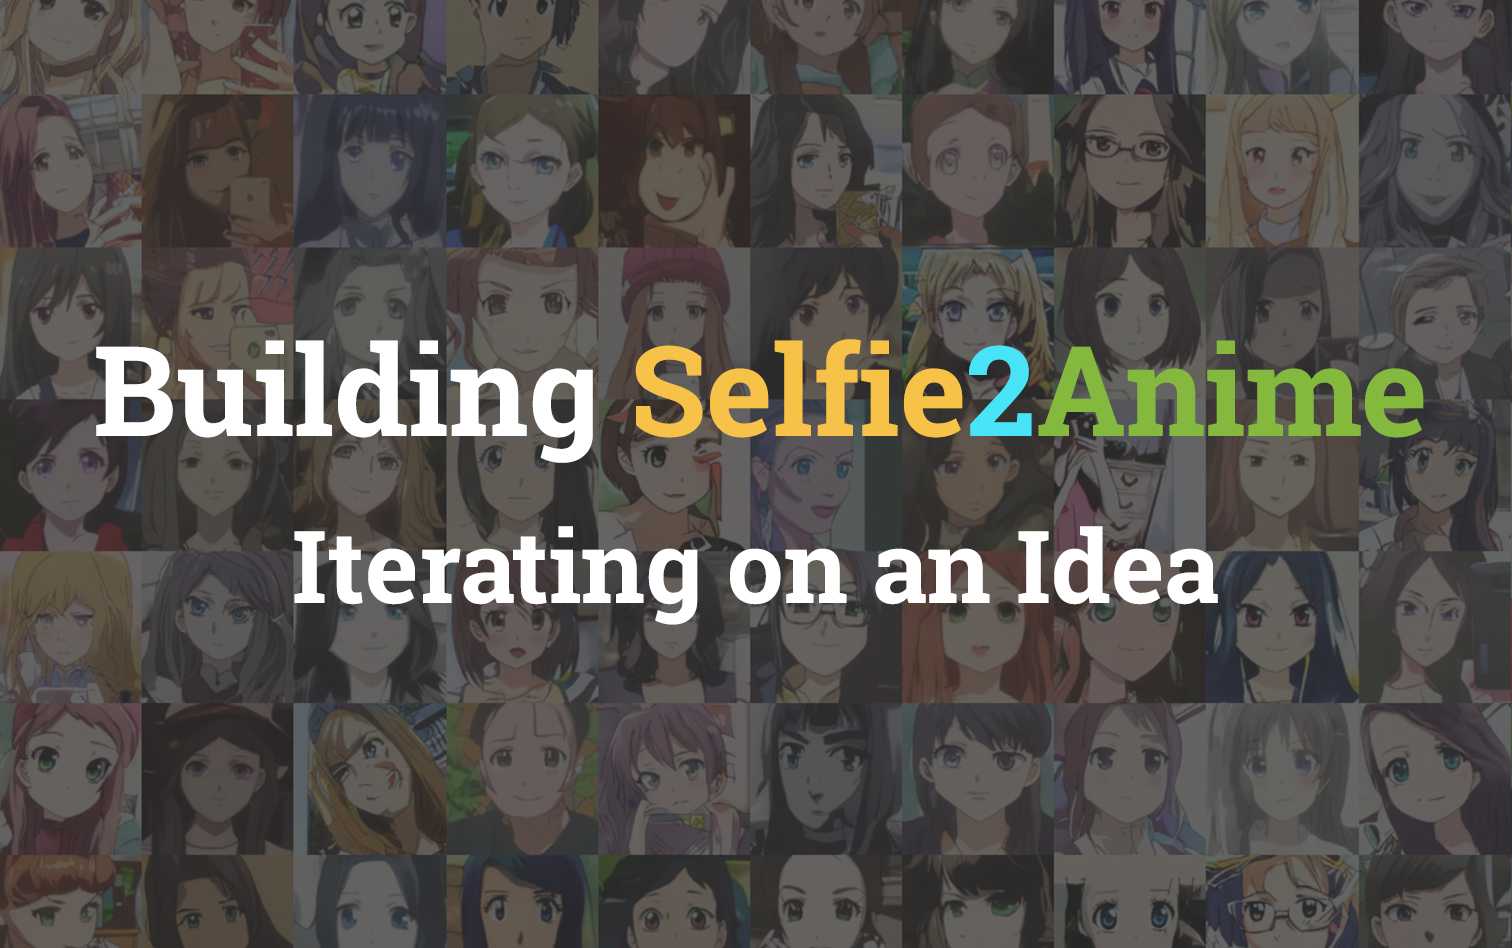 Building Selfie2Anime - Iterating on an Idea